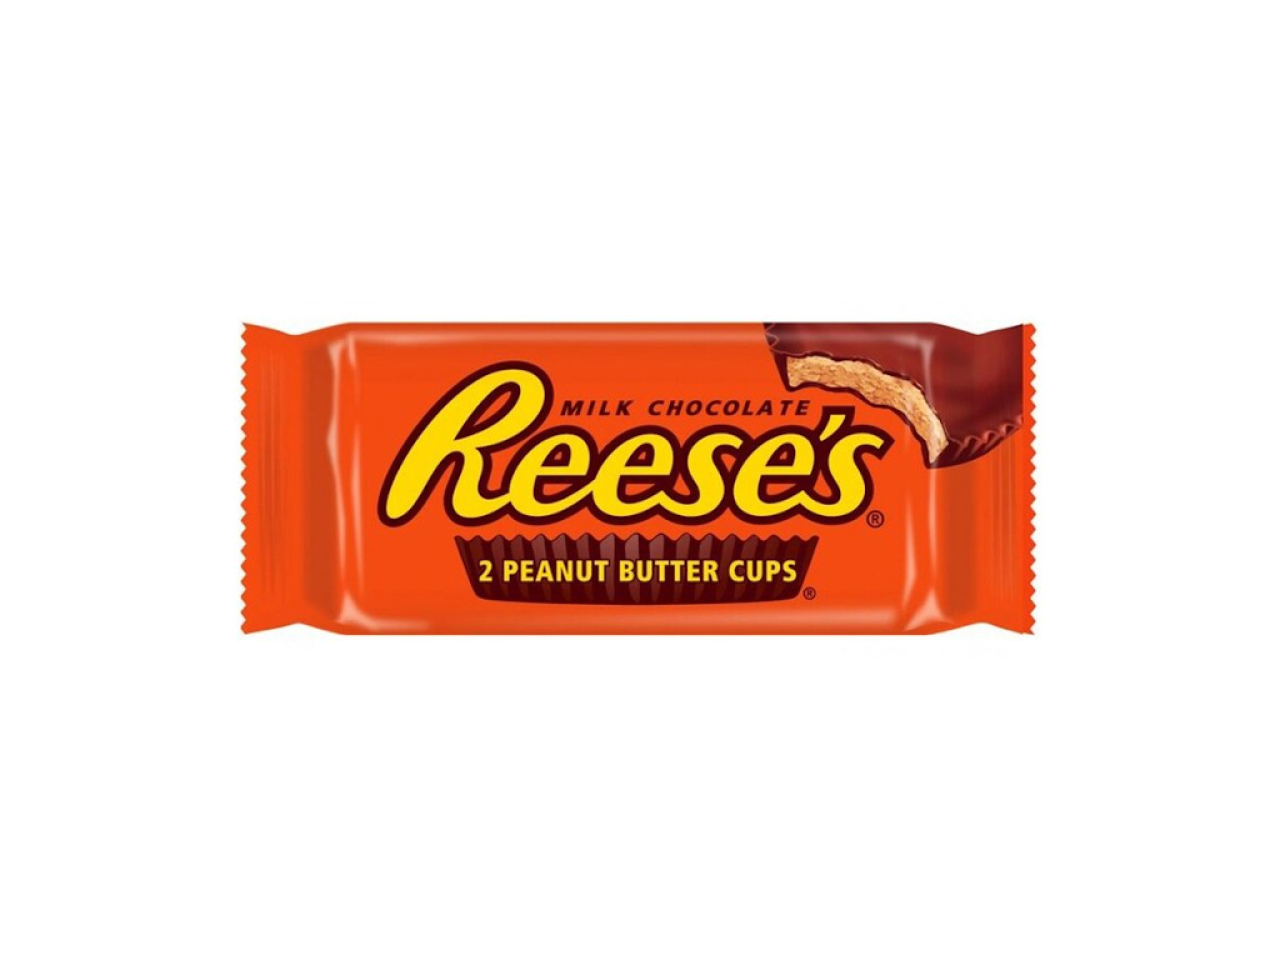 Butter cups. Reese's Peanut Butter батончик. Chocolate Peanut Butter. Peanut Butter Cups. Reese's Cups.